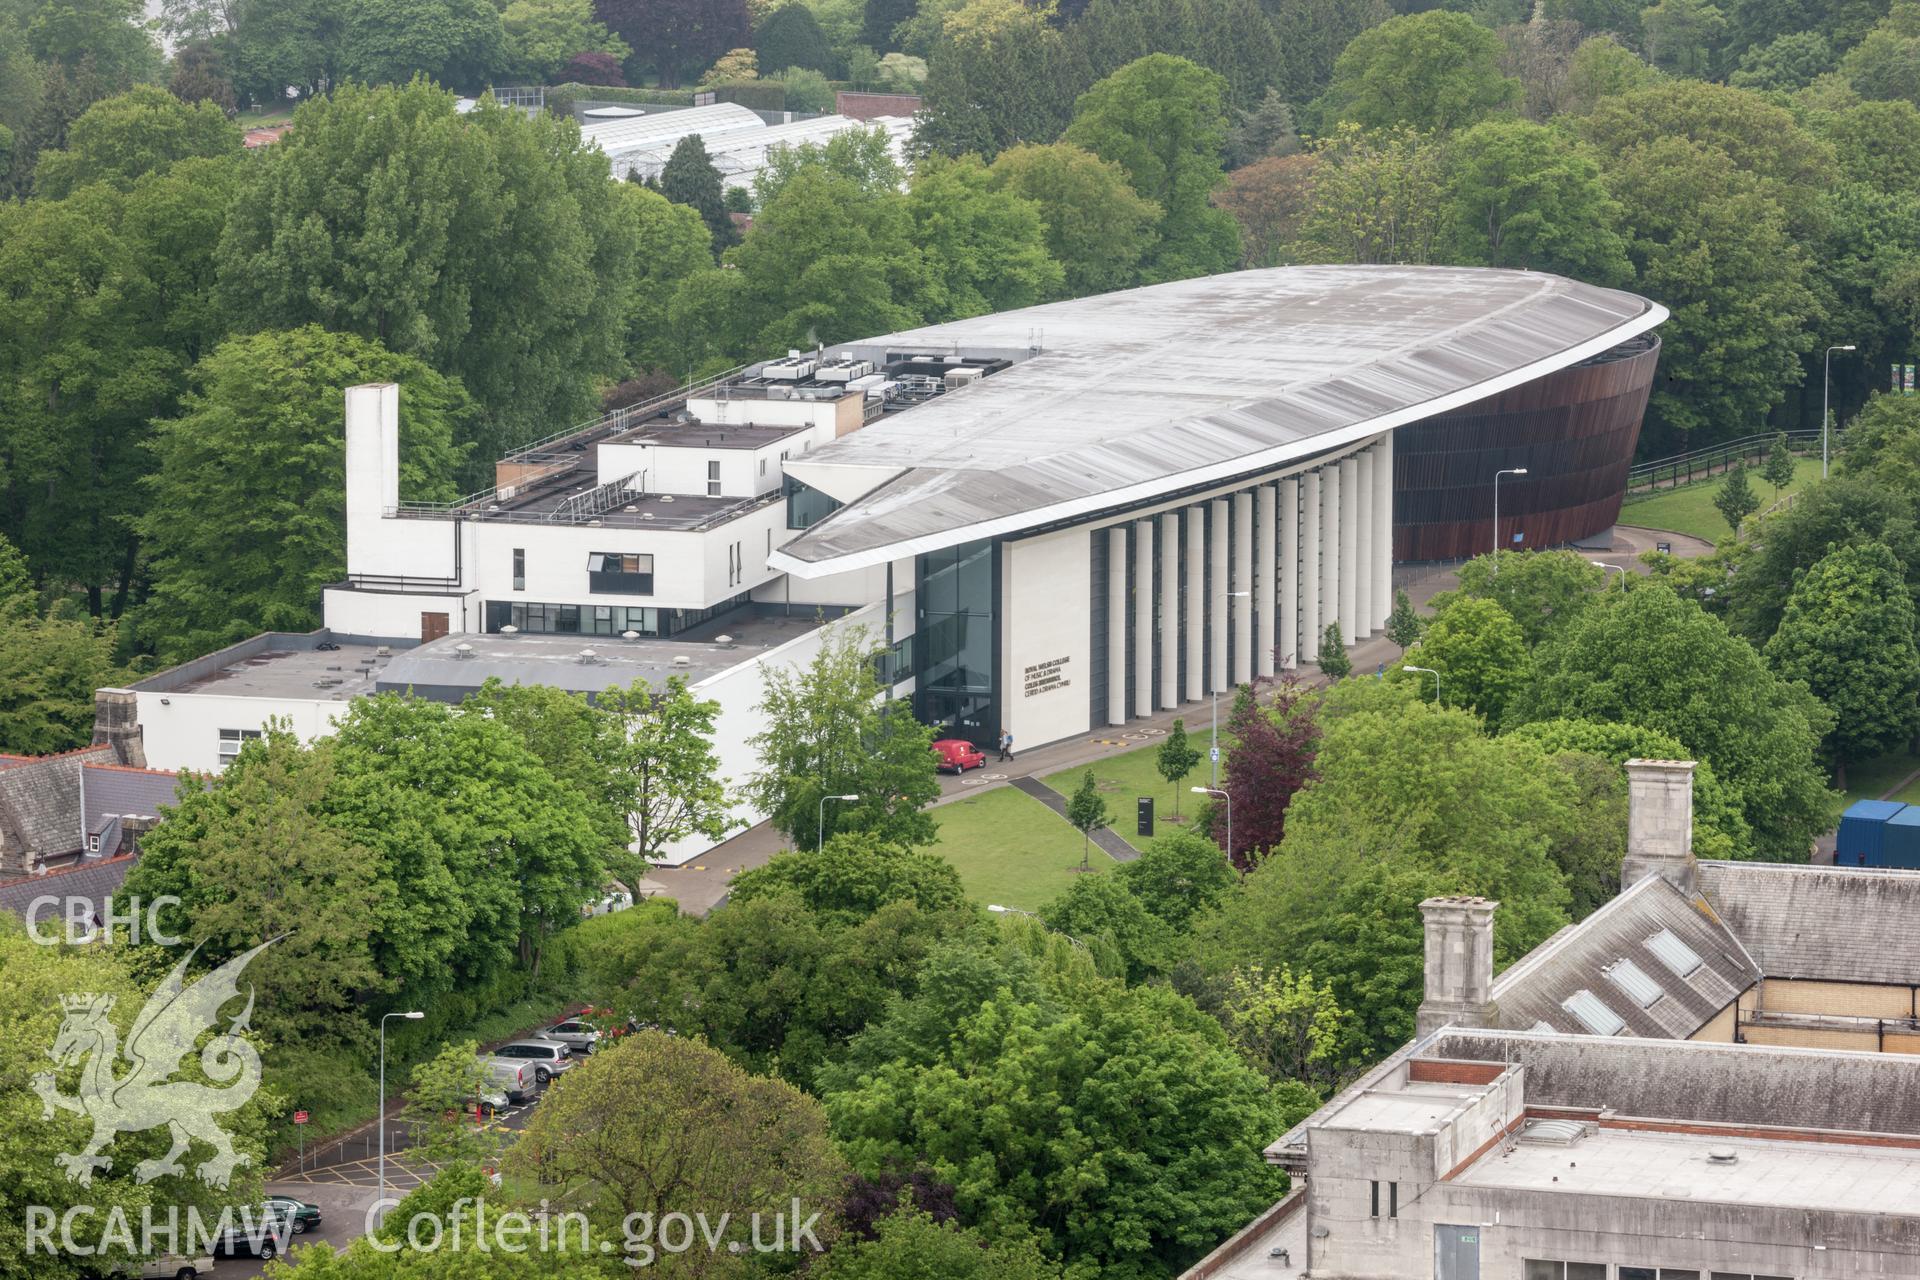 View of the Welsh College of Music and Drama from the roof of the Capital Building